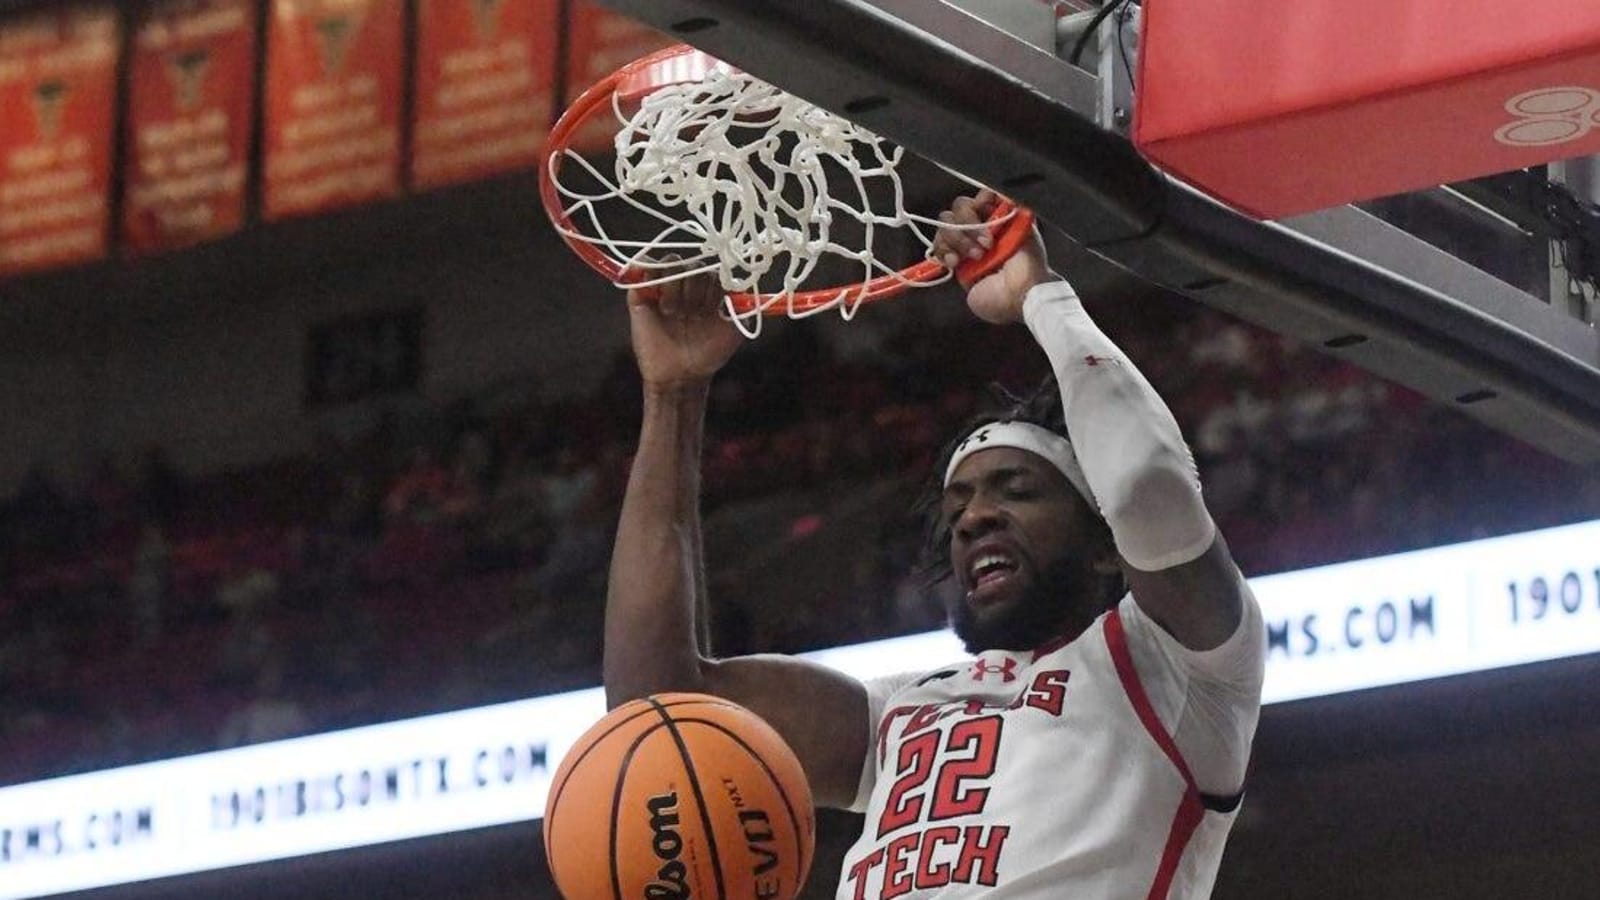 Texas Tech finishes strong to beat San Jose State